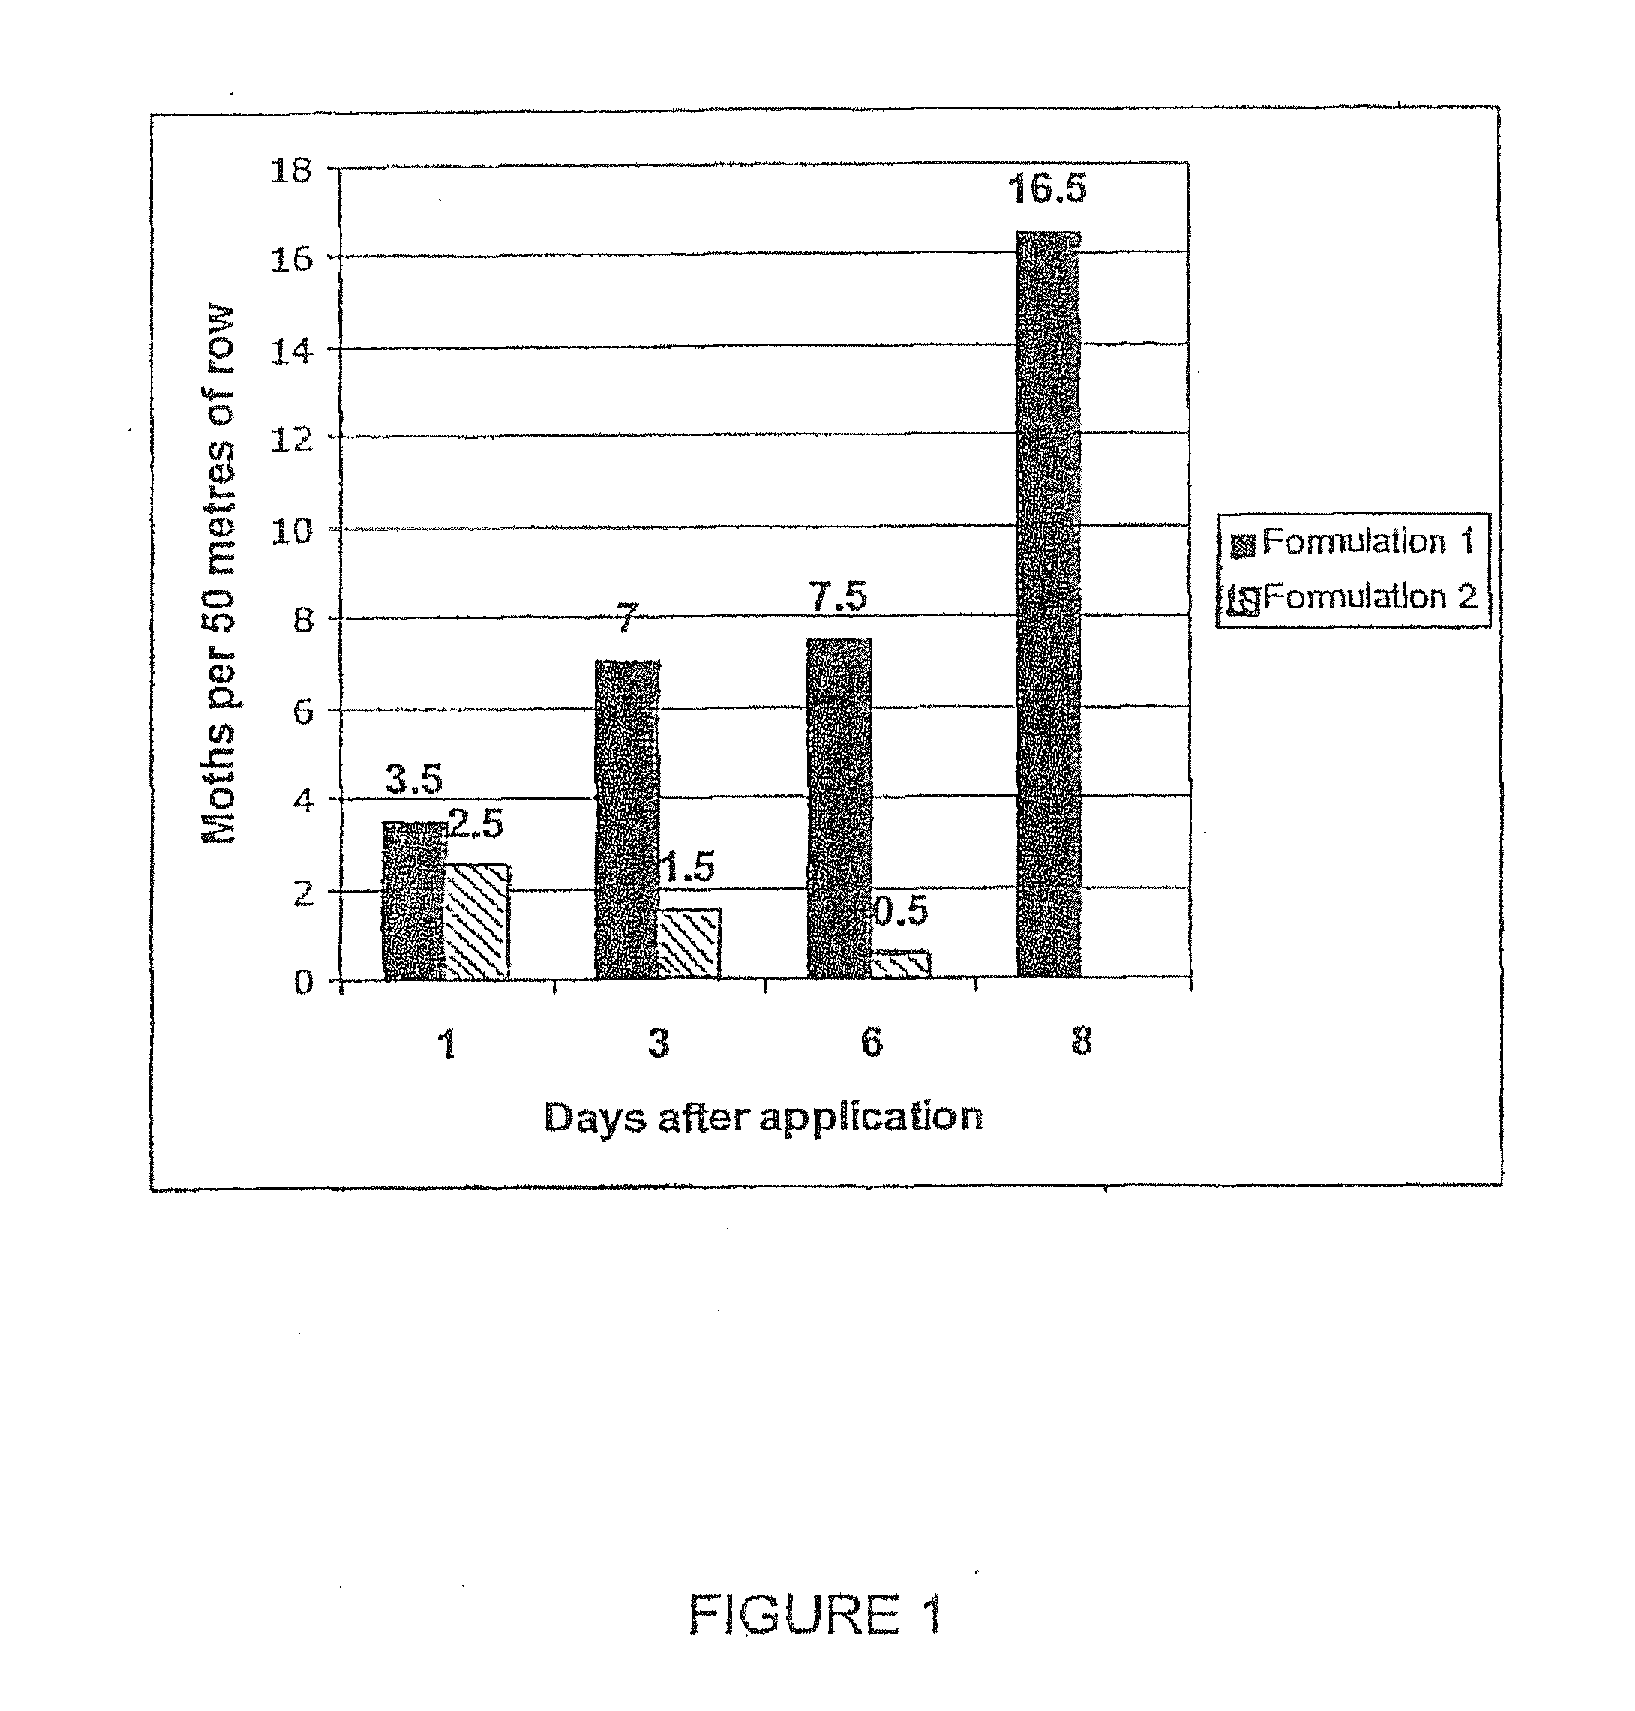 Insect control substance that can be applied to a surface